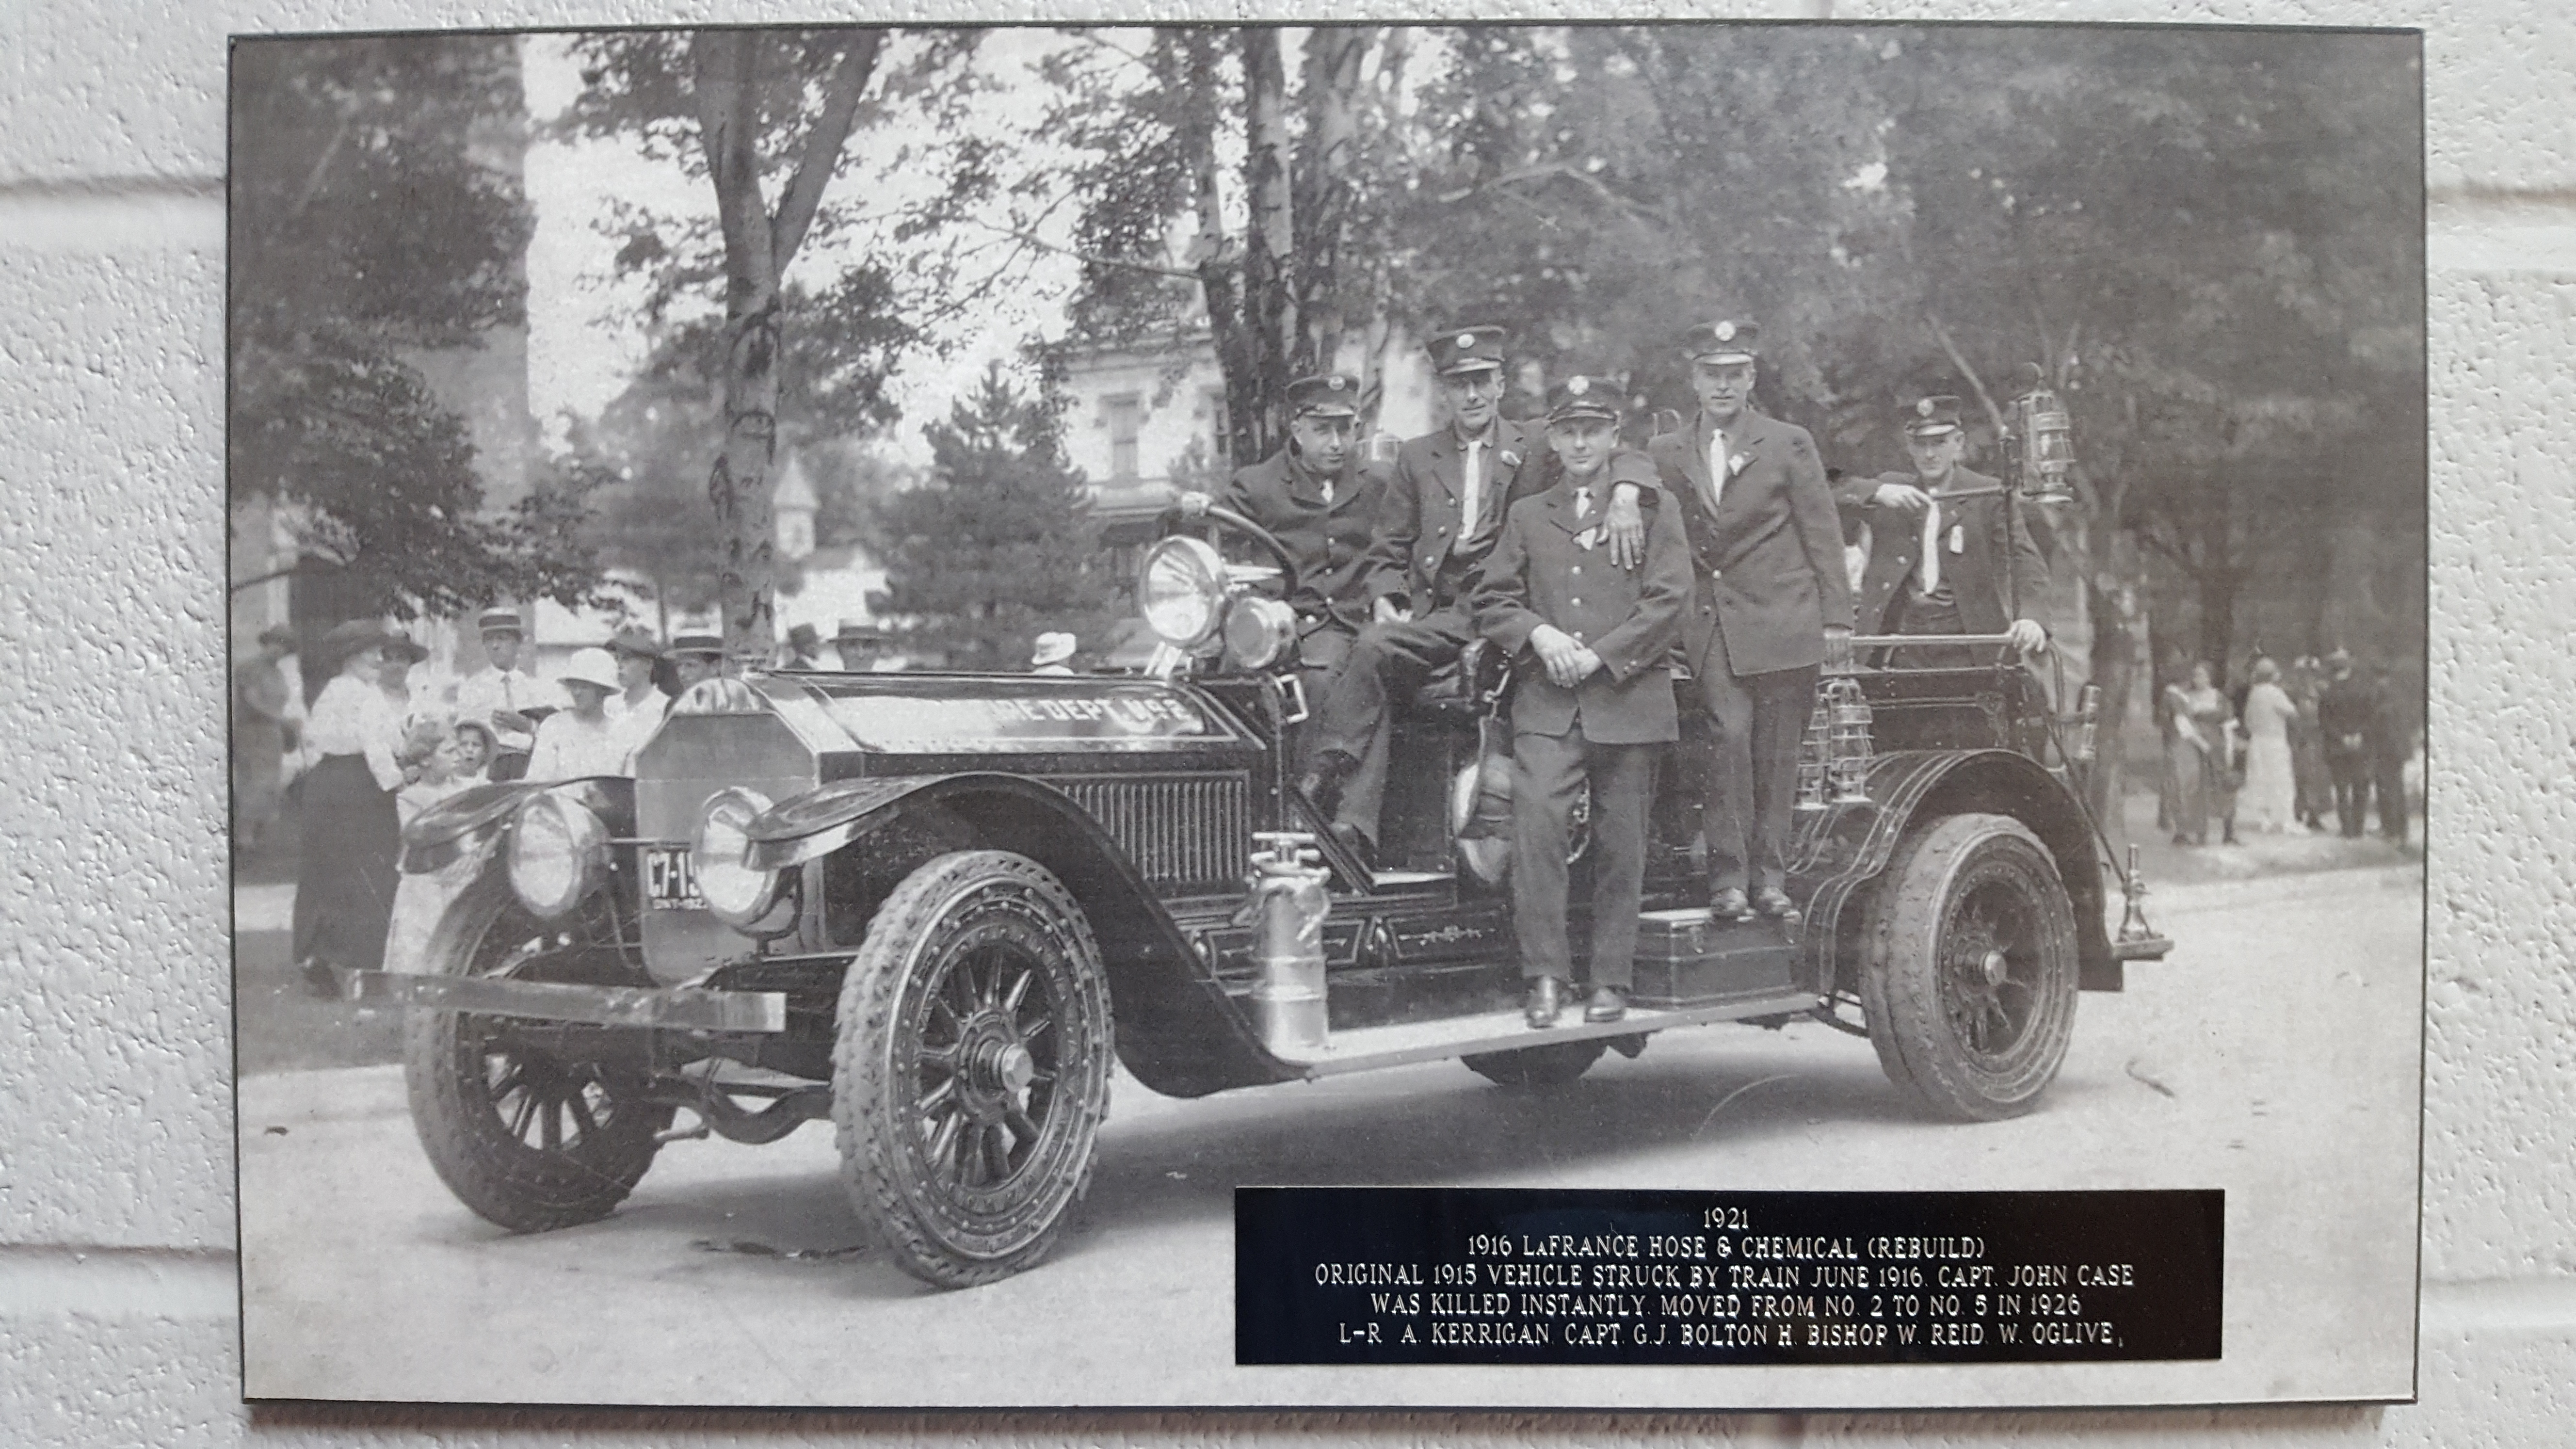 1916 LaFrance Hose & Chemical (Rebuild). Original 1915 vehicle was struck by a train June 1916. Capt. John Case was killed instantly. This vehicle was re-positioned from Station 2 to Station 5 in 1926. L-R: Capt. G.J. Bolton, H.  Bishop, W. Reid, W. Oglive.  Circa 1921.